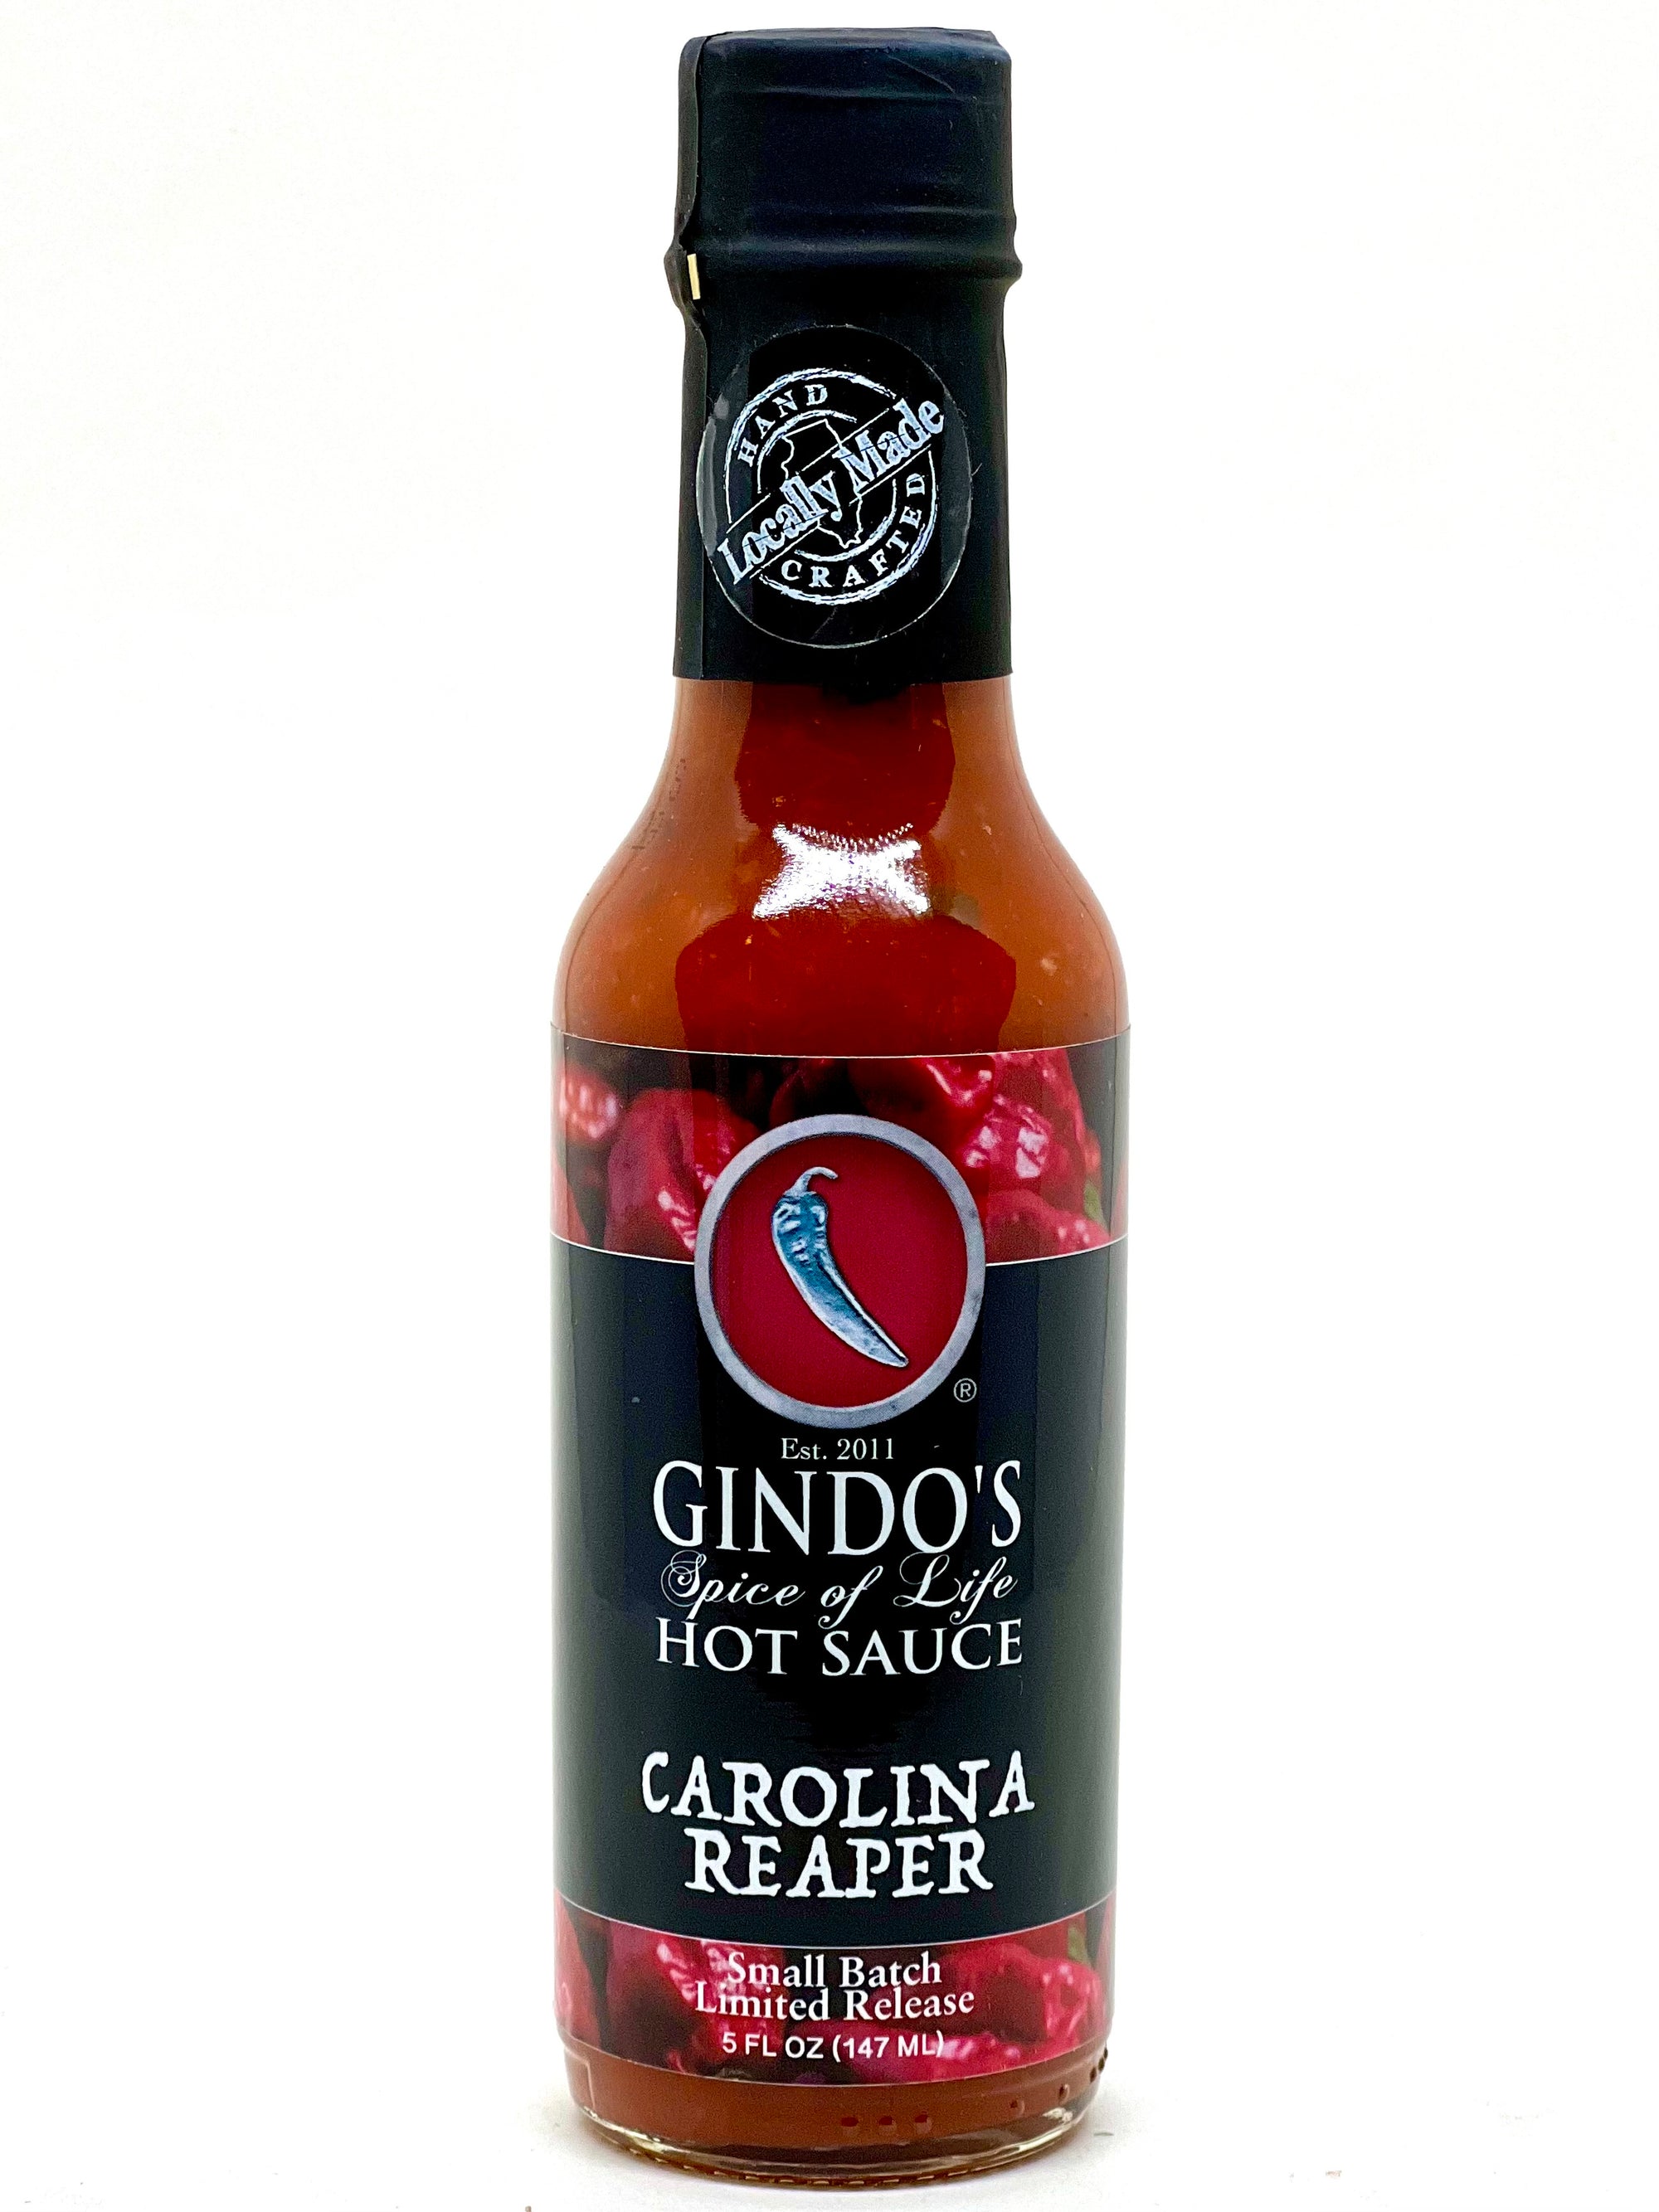 Gindo's Carolina Reaper pepper hot sauce is uniquely balanced with milder peppers and is super flavor driven, allowing you to experience the flavor of the Carolina Reaper pepper without getting burned by it's ferocious heat. It's a downright enjoyable experience! 